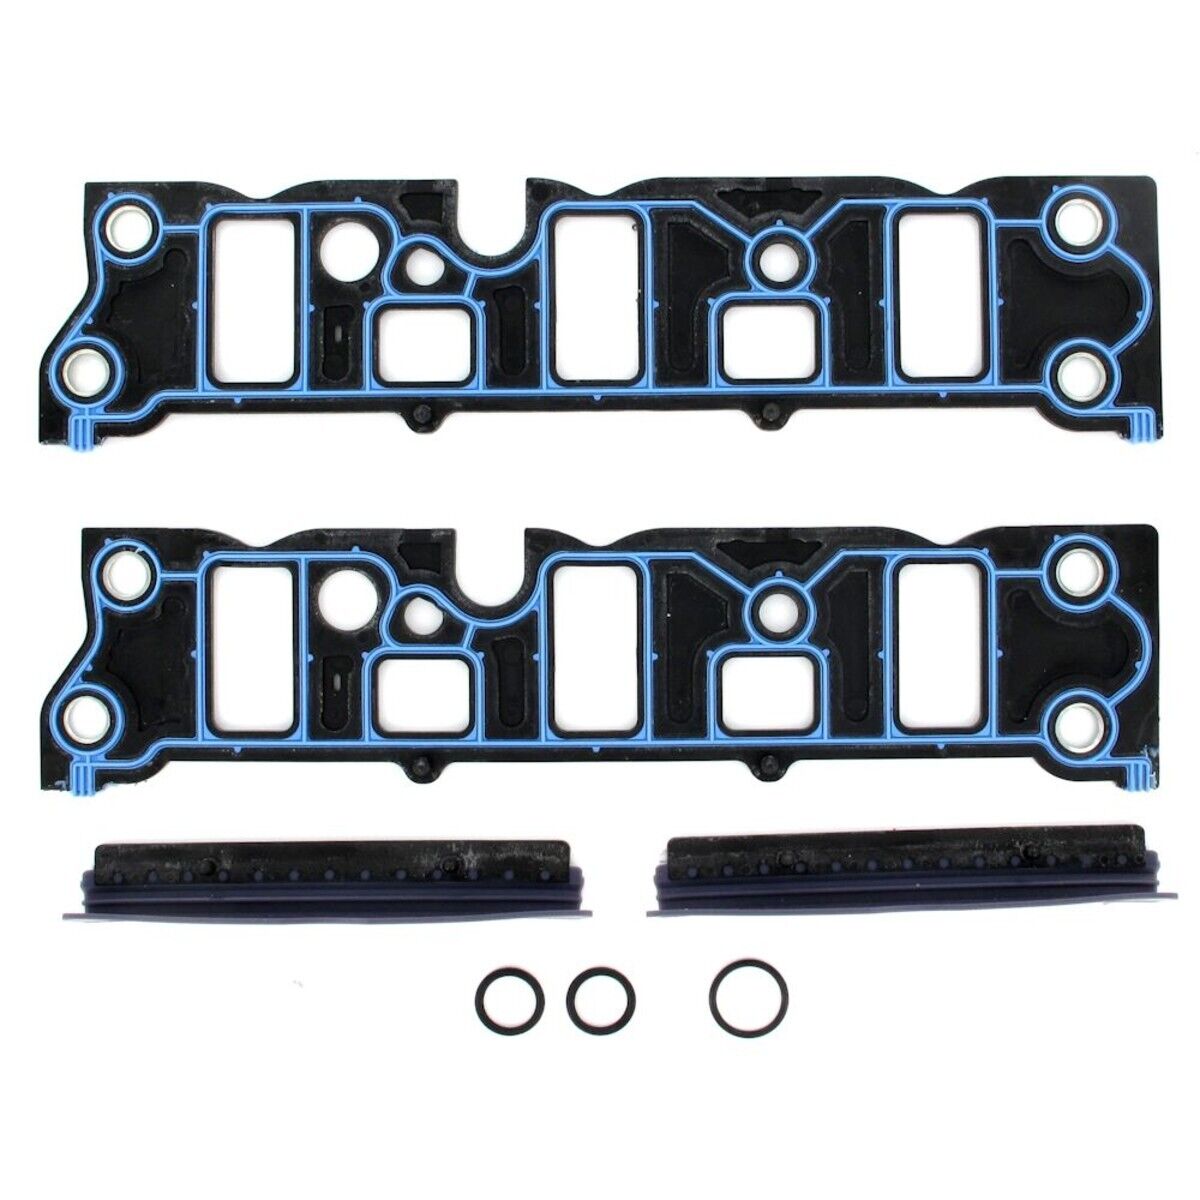 AMS3593 APEX Intake Manifold Gaskets Set for Chevy Olds Le Sabre Impala Camaro